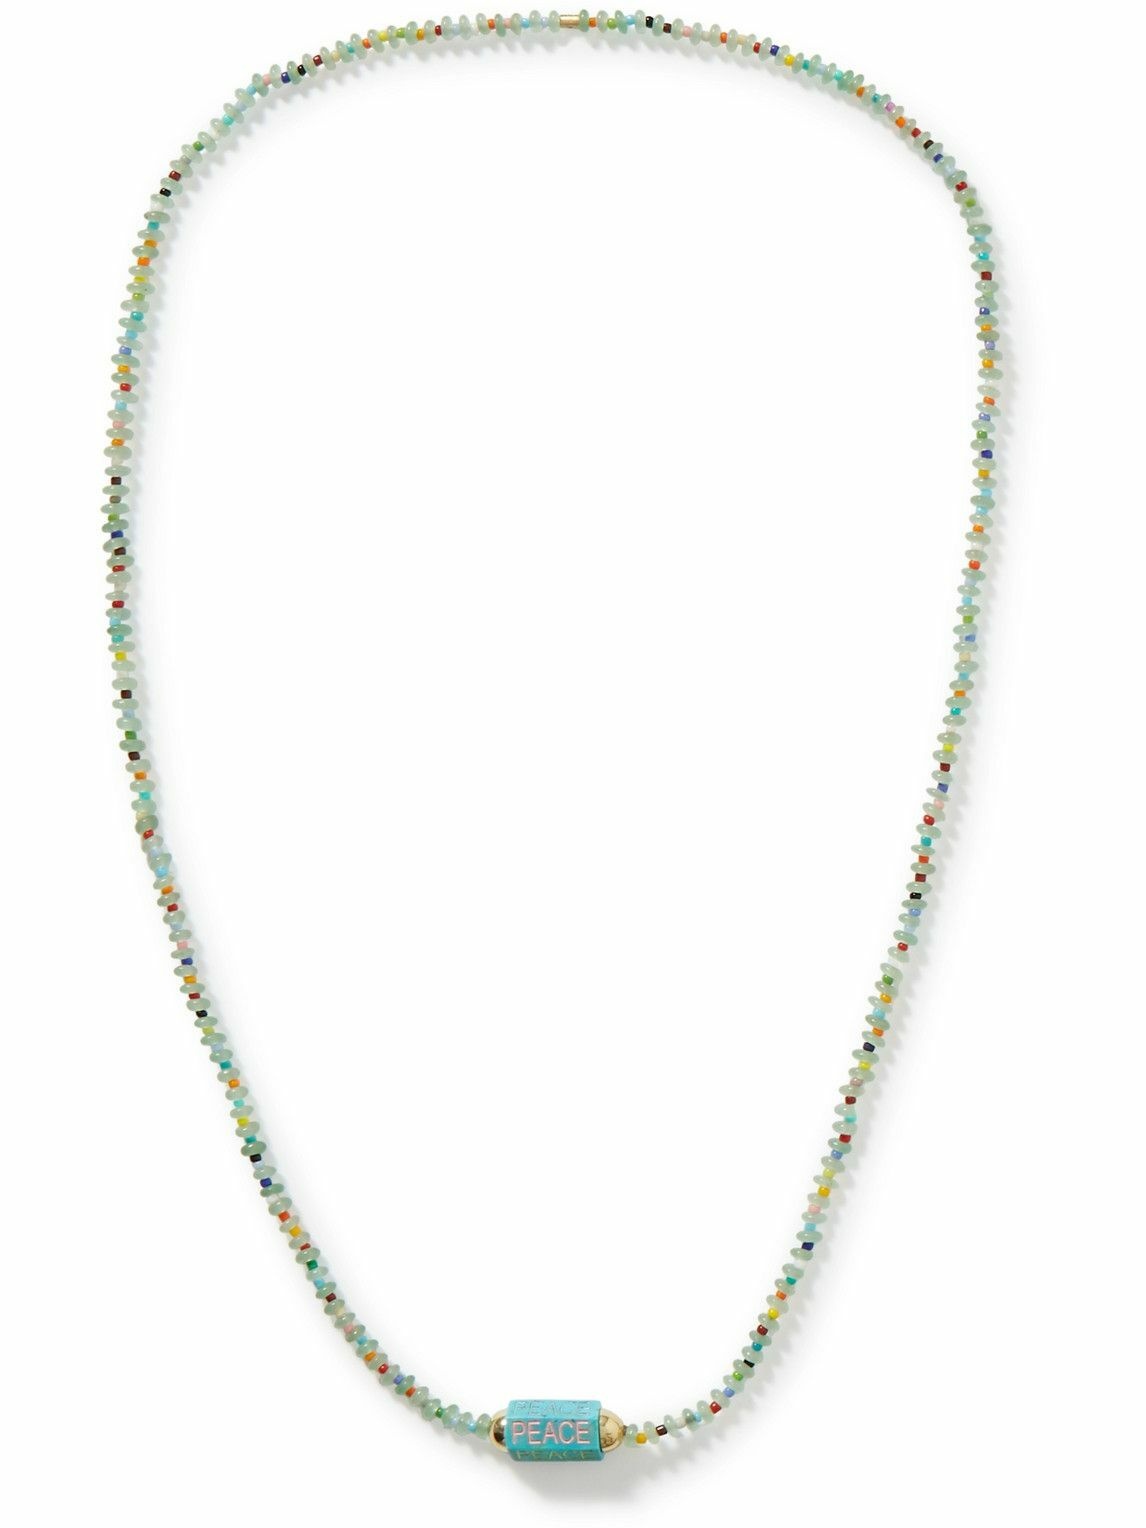 Photo: Luis Morais - Gold, Turquoise, Enamel and Glass Beaded Necklace